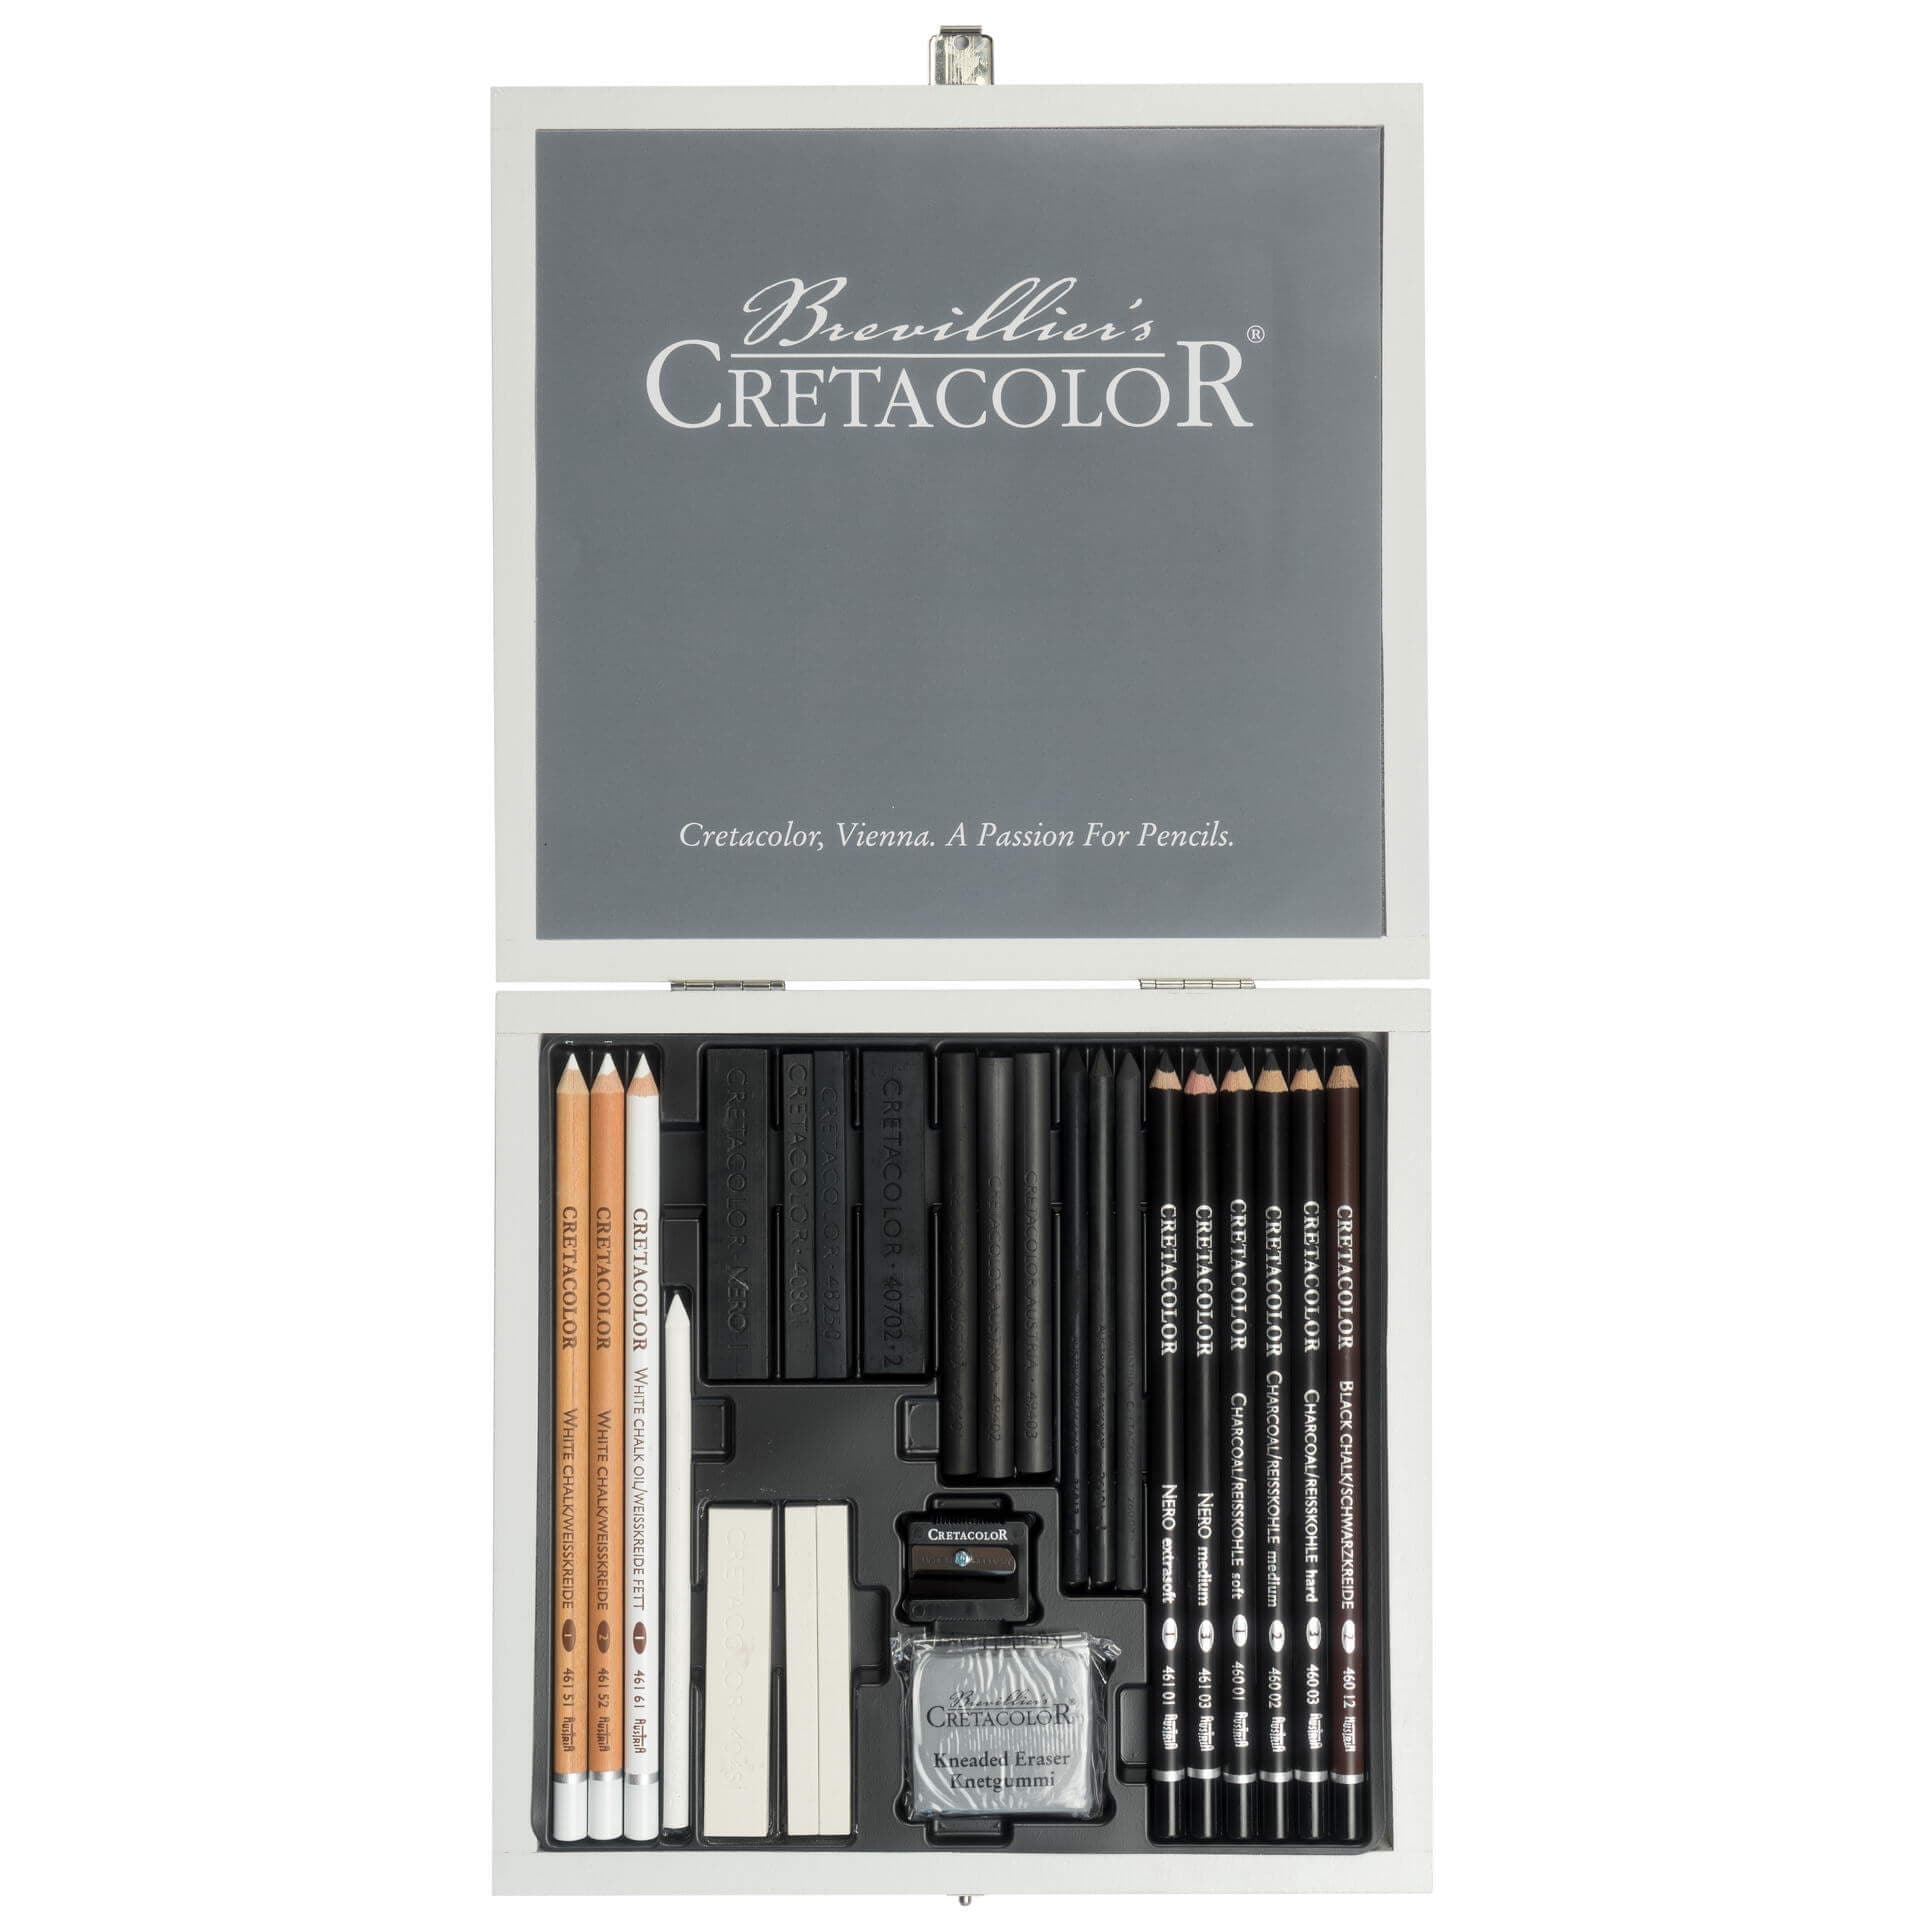 Cretacolor Black & White Charcoal Drawing Set of 25